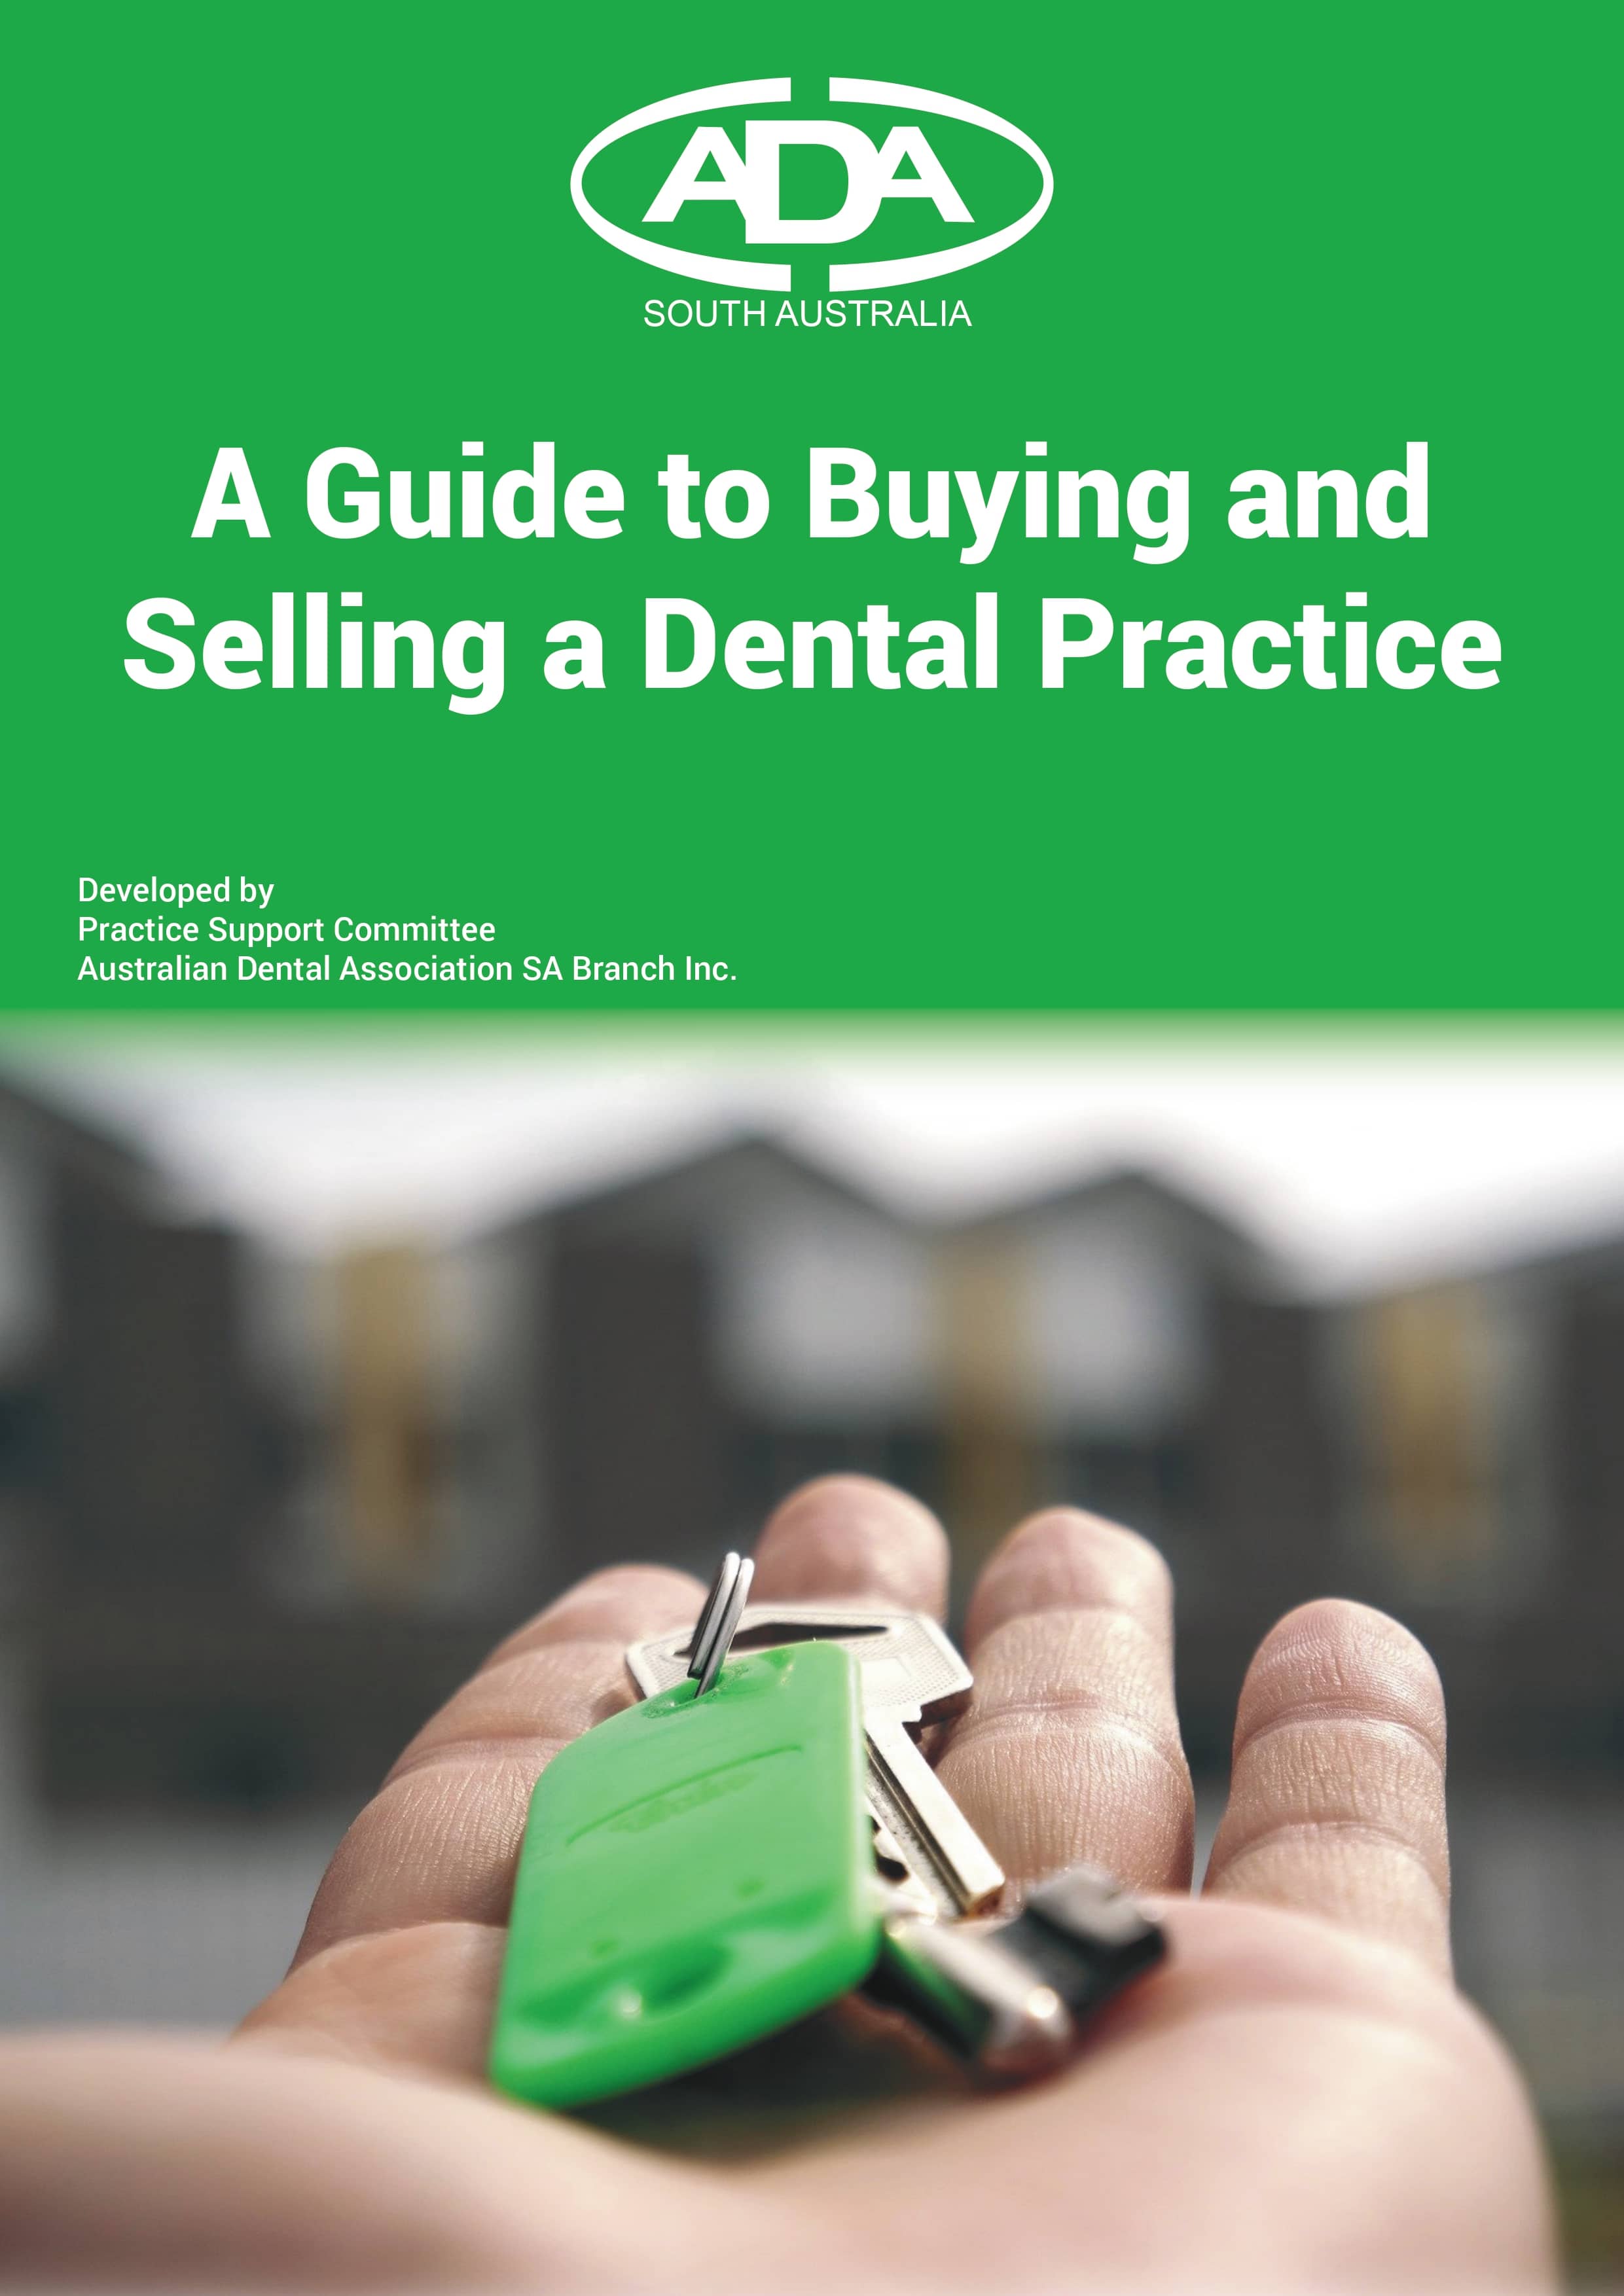 Download A Guide to Buying and Selling a Dental Practice